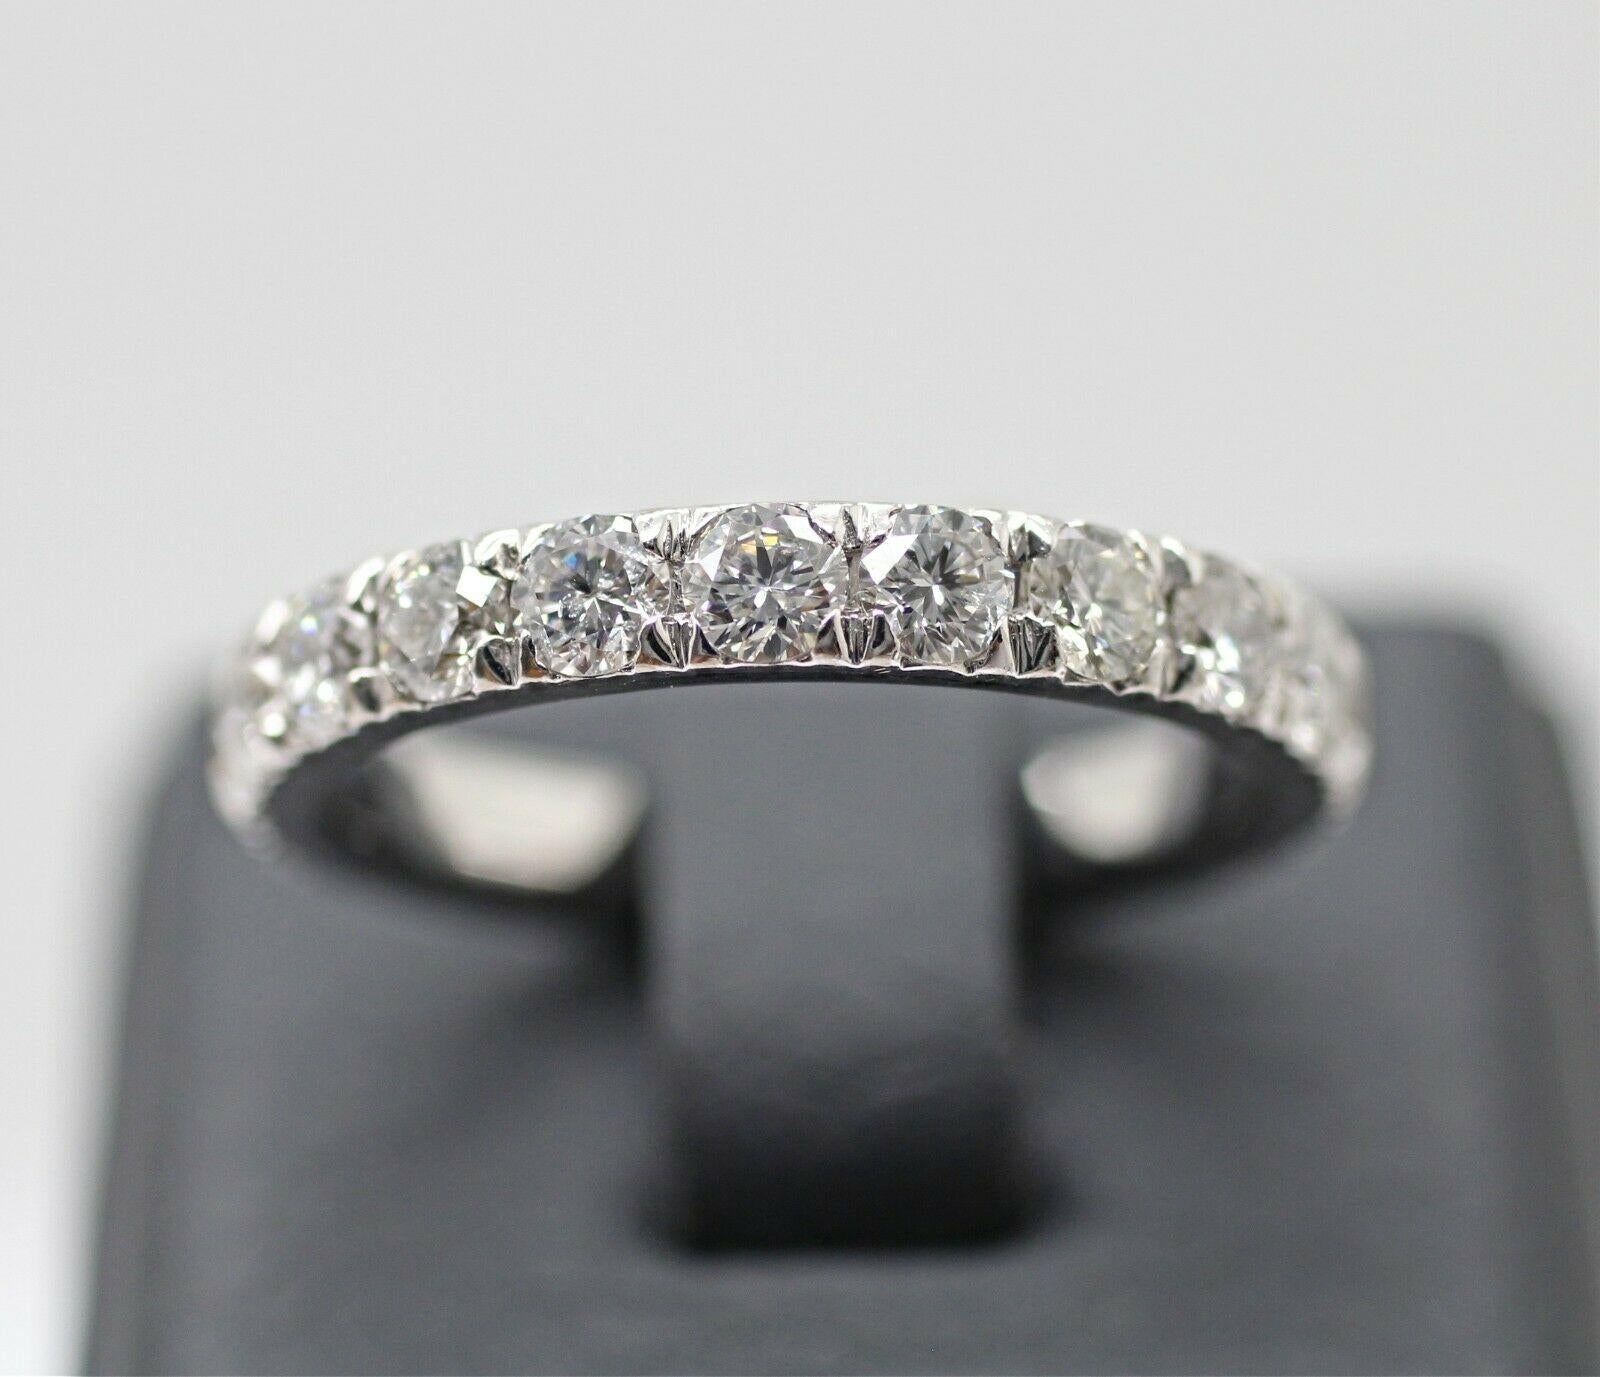  Corona 18k white gold diamond eternity ring 1.50cts. ring size is 6.25 containing,
Specifications:
    main stone: ROUND DIAMONDS
    diamonds: 17 PIECES
    carat total weight: APPROXIMATELY 1.50
    color: F
    clarity: SI2
    brand: CUSTOM
   